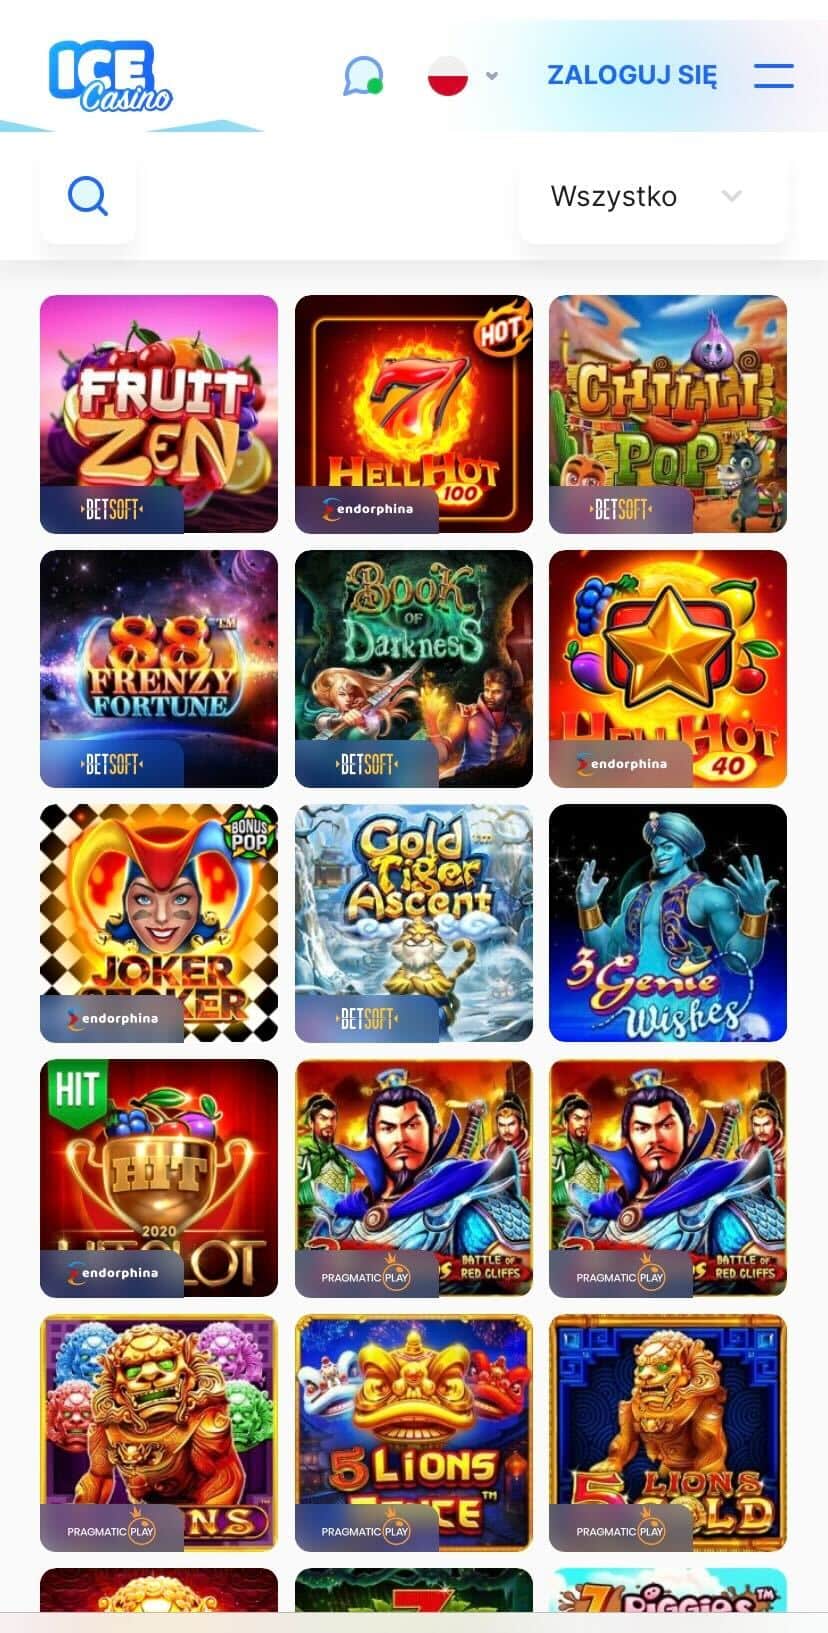 Ice Casino Mobile Review